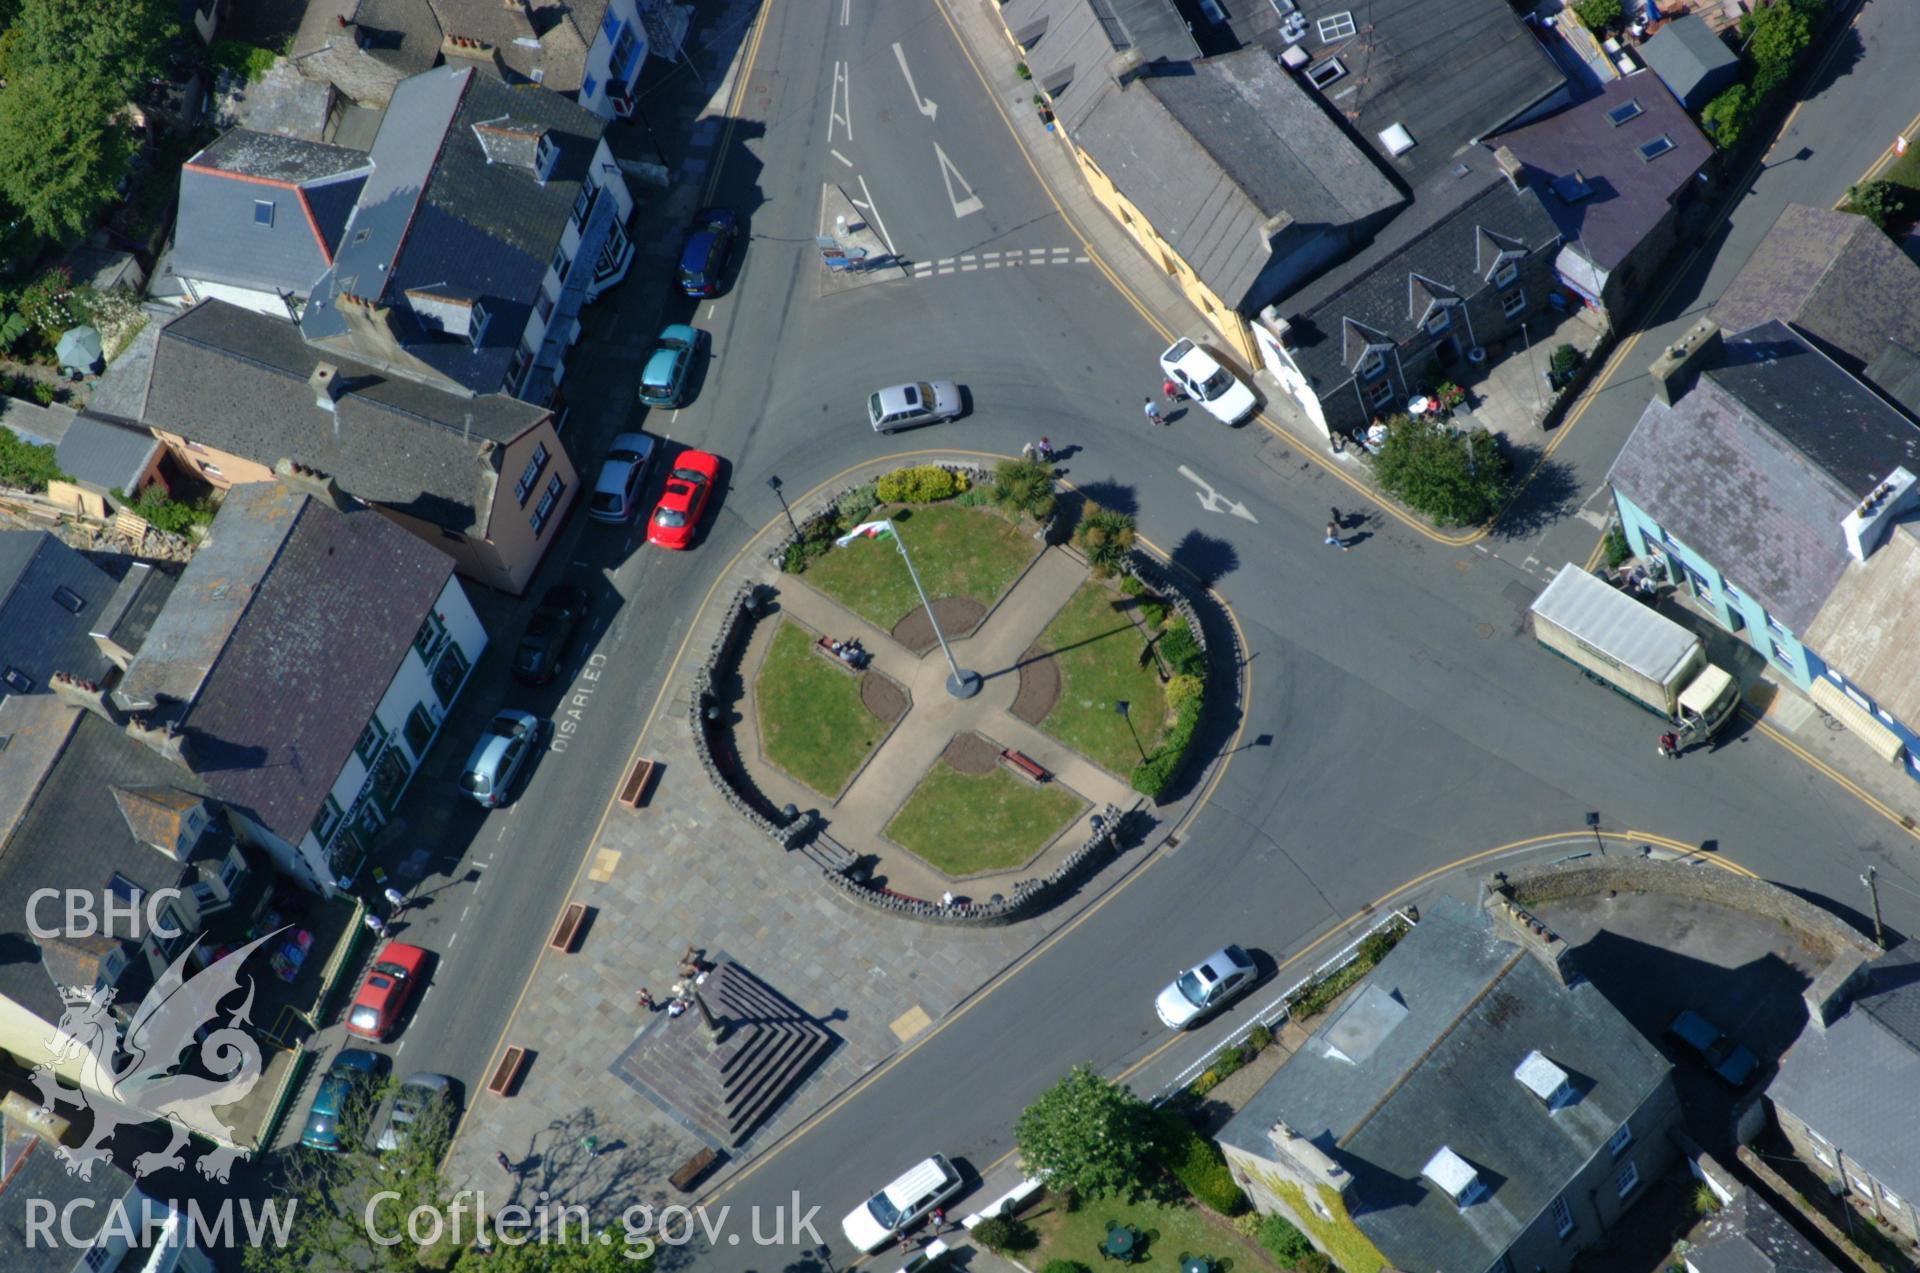 RCAHMW colour oblique aerial photograph of City Cross, St Davids taken on 25/05/2004 by Toby Driver